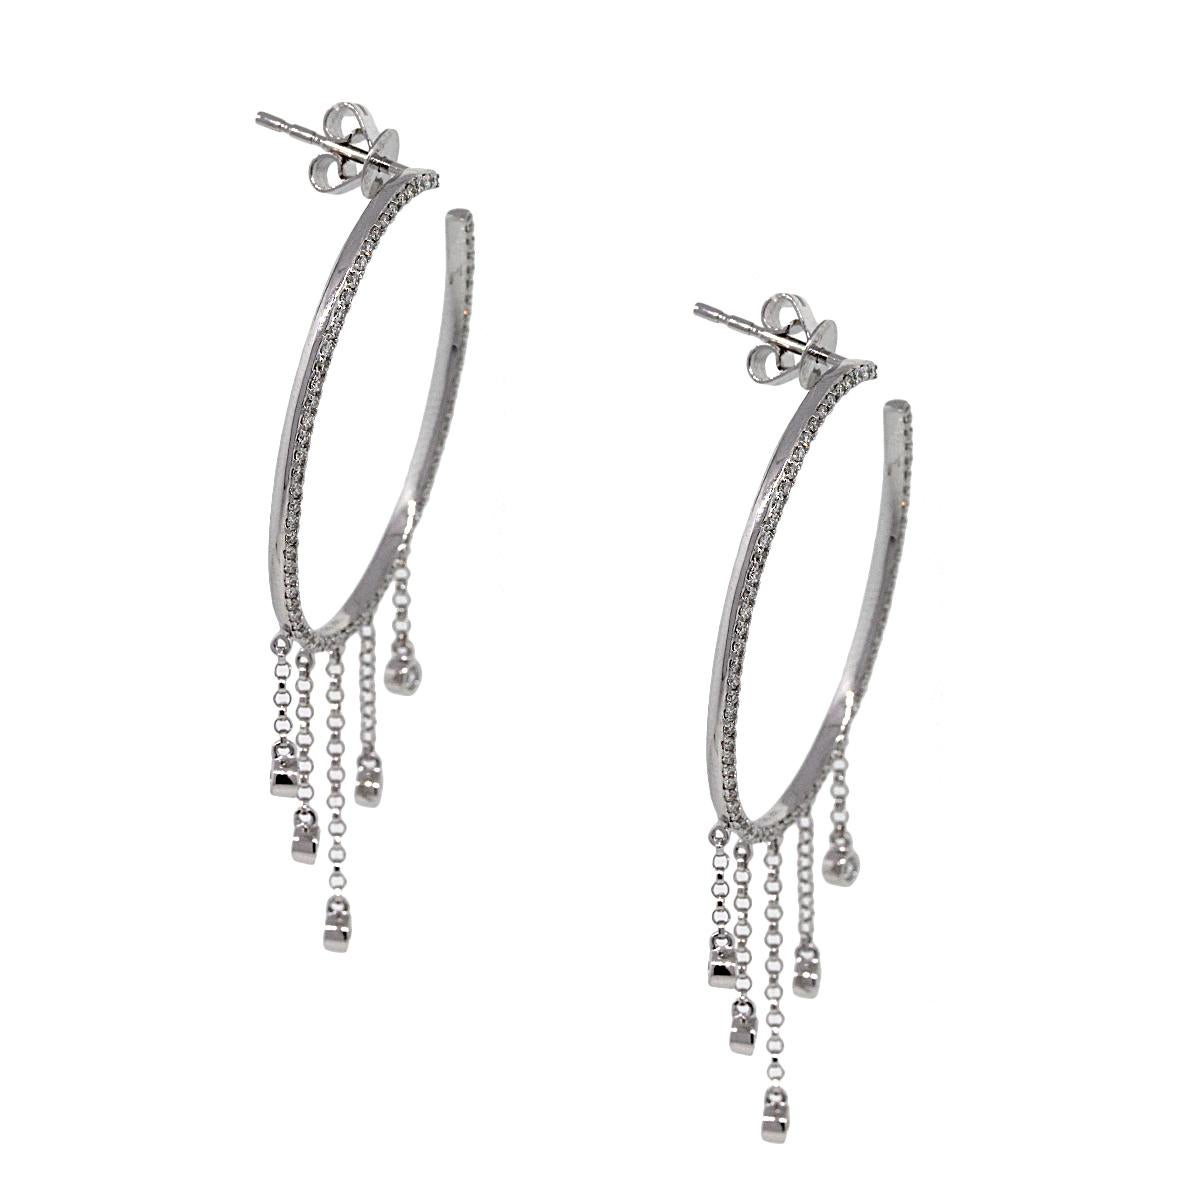 Material: 14k white gold
Style: Diamond Pave Oval Dangle Hoops
Diamond Details: Approximately 0.56ctw of round brilliant diamonds. Diamonds are G/H in color and SI in clarity.
Earring Measurements: 0.93″ x 0.50″ x 2″
Total Weight: 4.6g